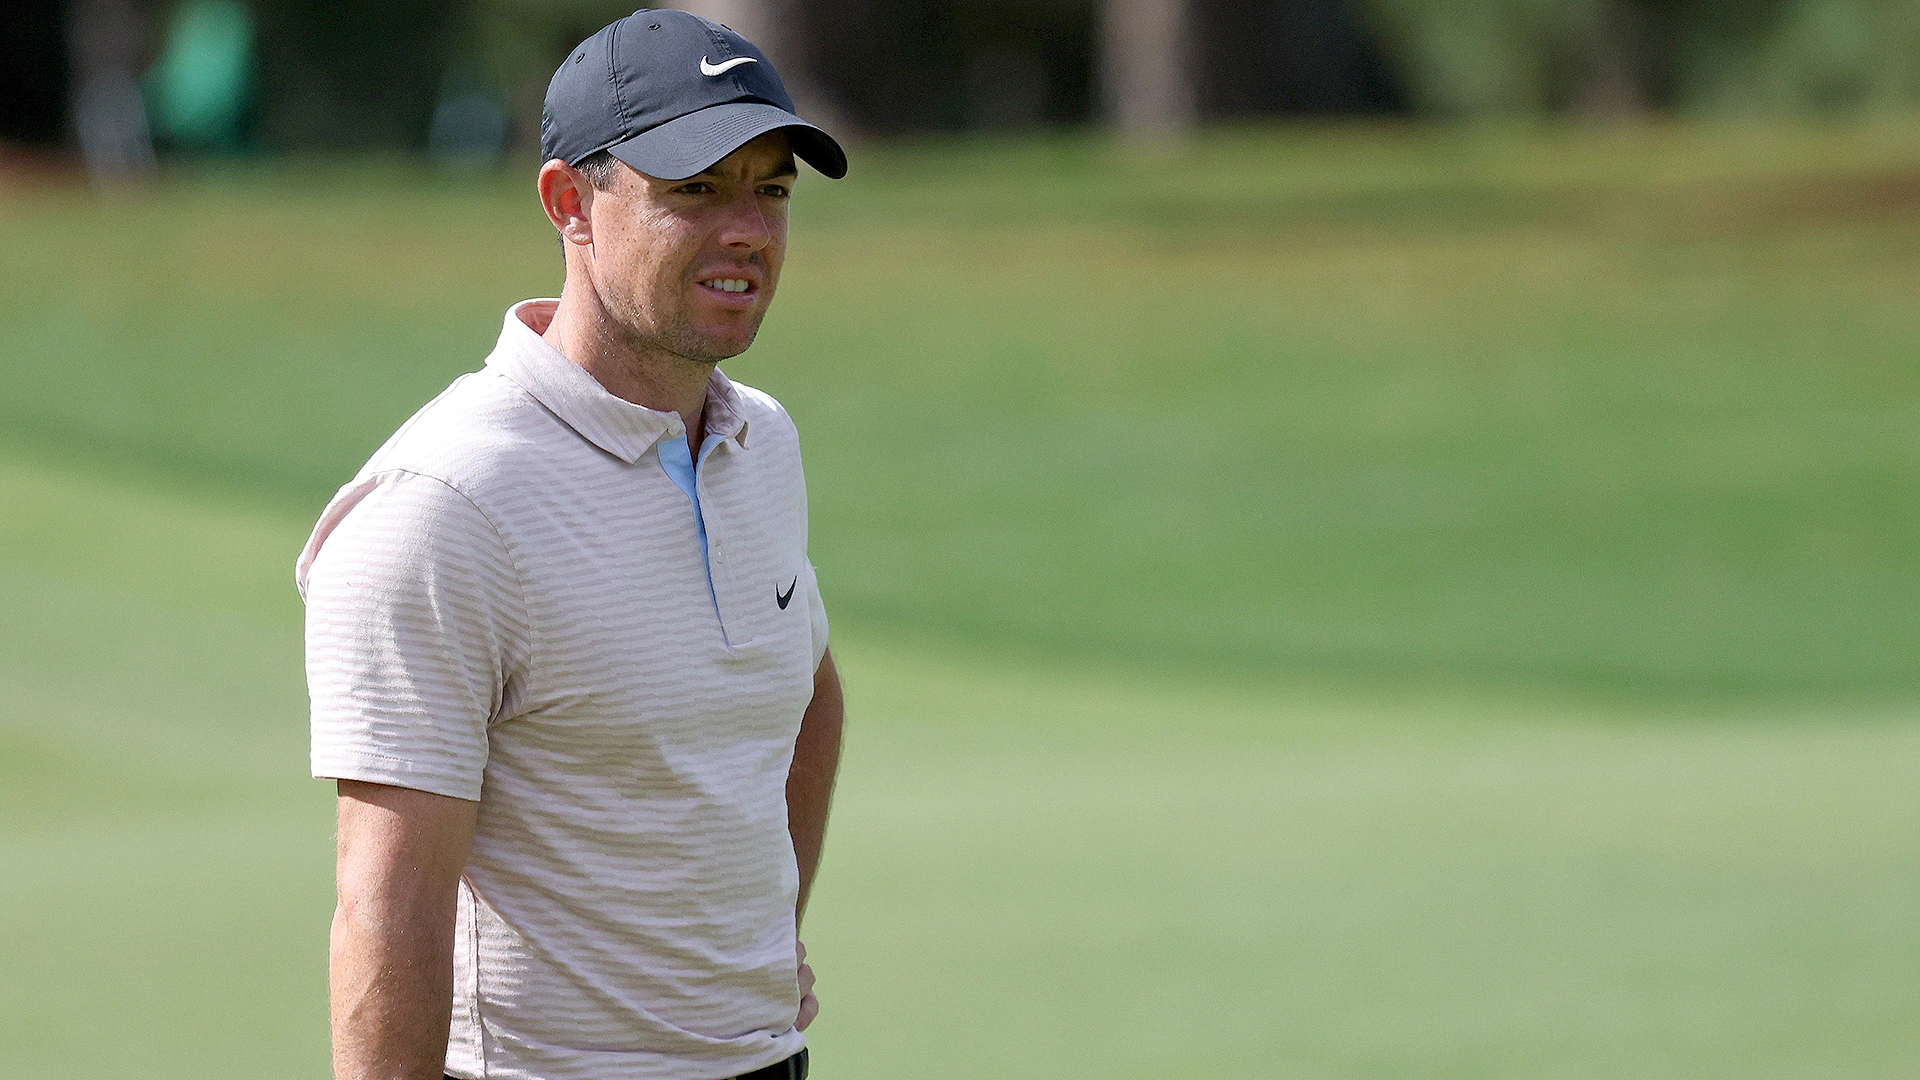 Rory McIlroy gets yet another backdoor top-10 at Masters 2